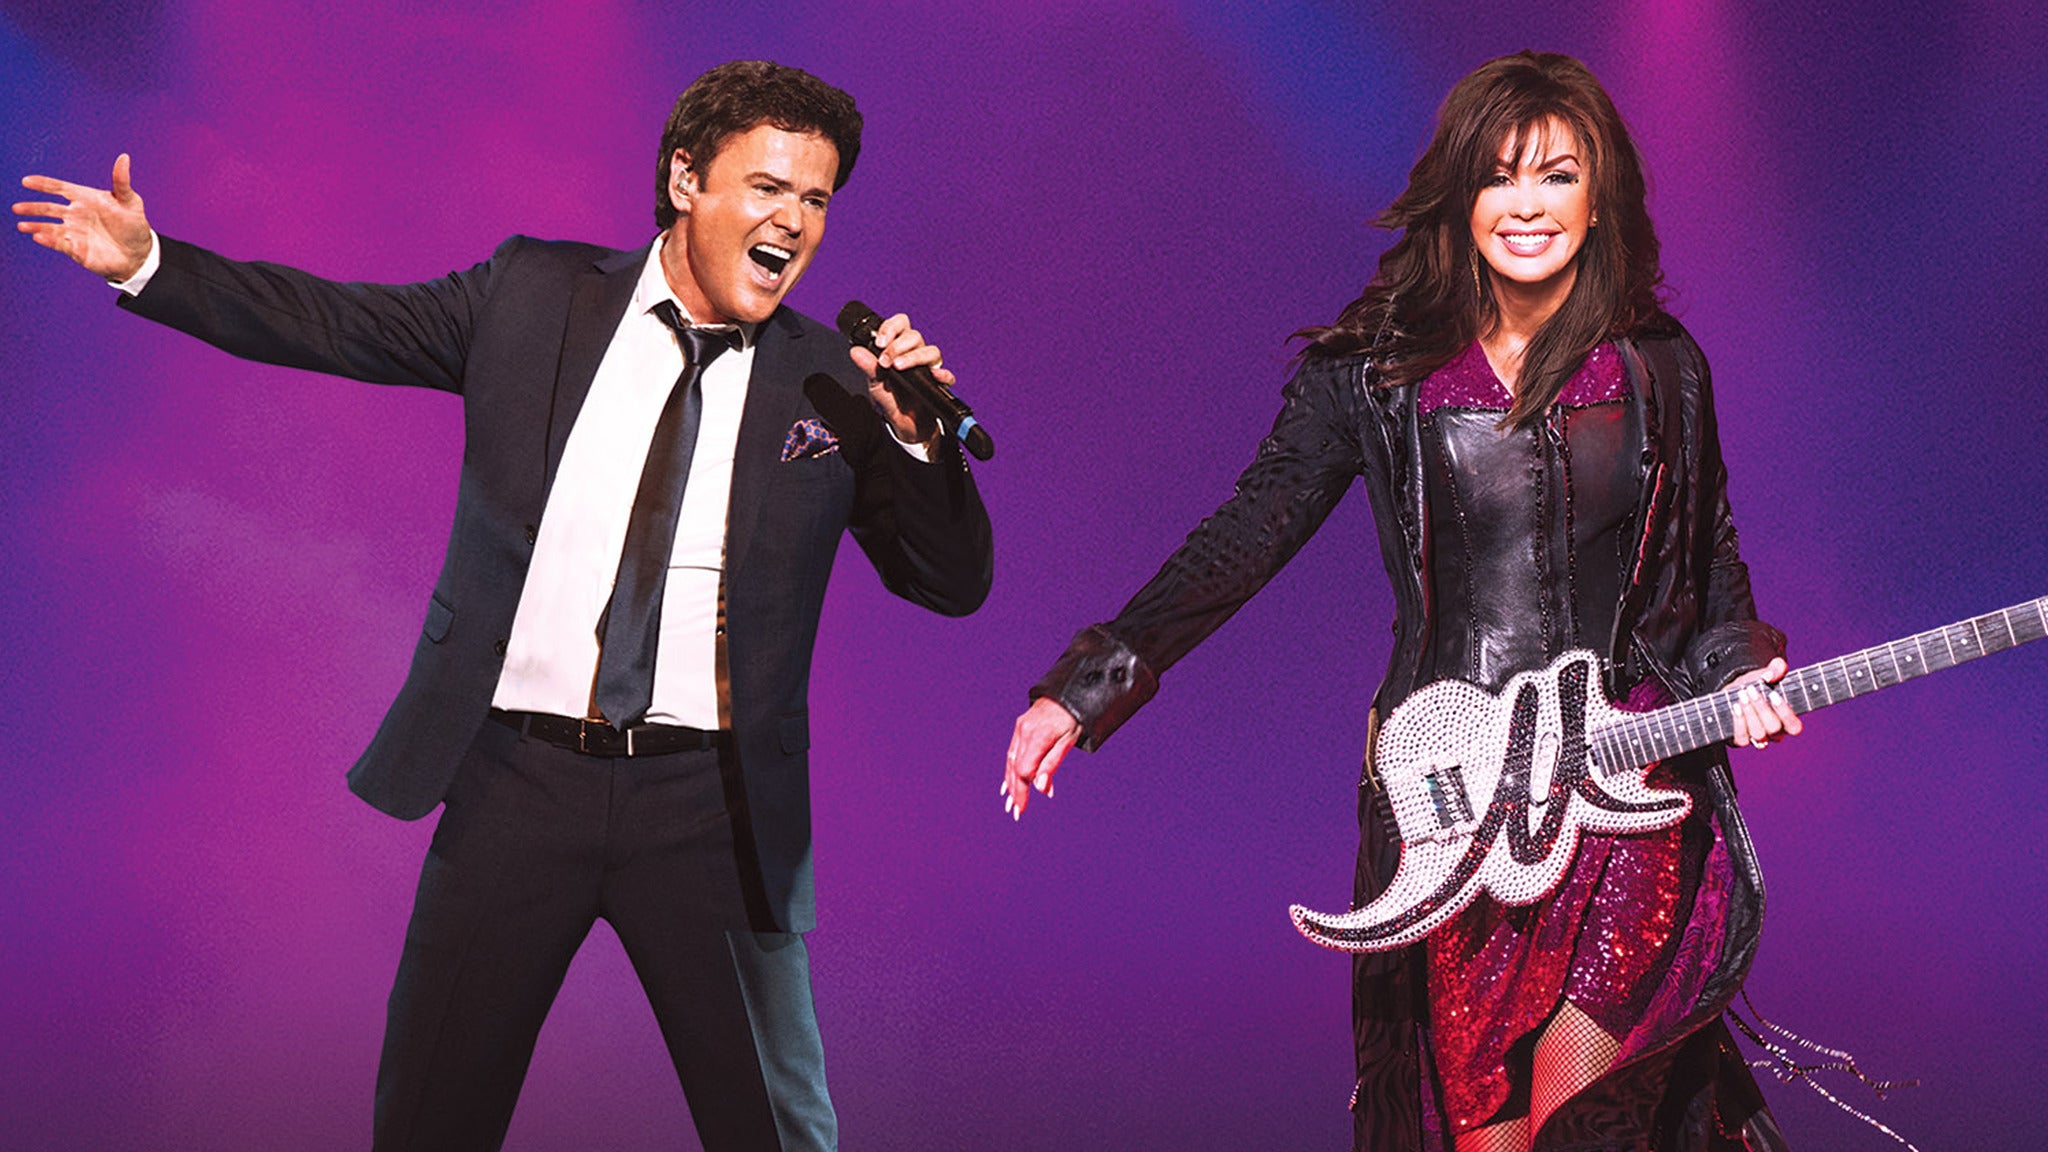 Donny & Marie Tickets, 20222023 Concert Tour Dates Ticketmaster